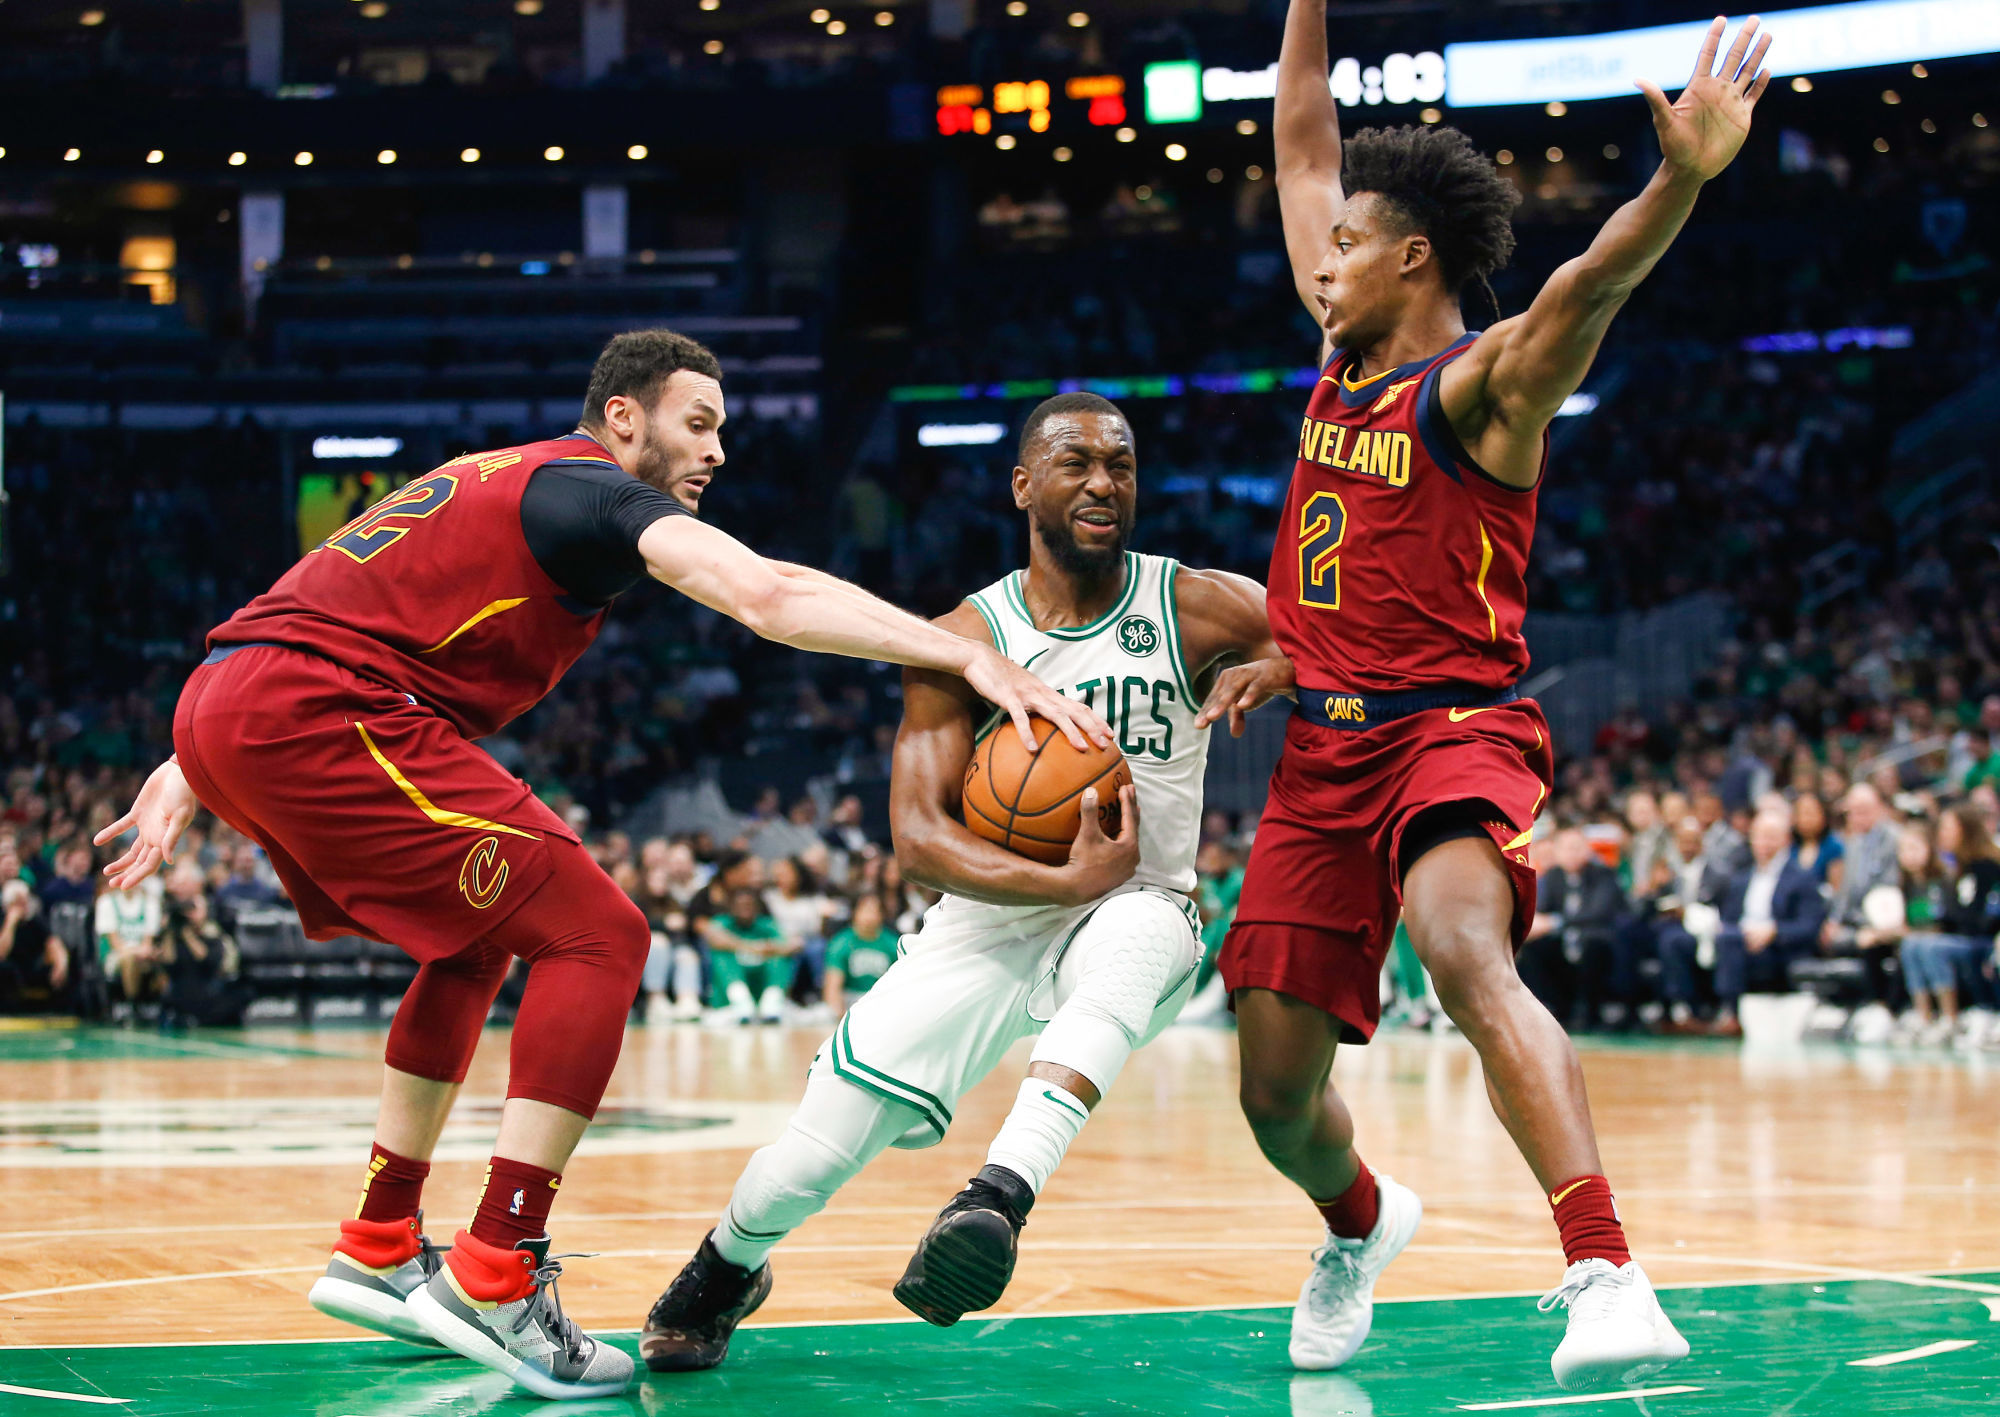 Oct 13, 2019; Boston, MA, USA; As Boston Celtics guard Kemba Walker (8) drives on Cleveland Cavaliers guard Collin Sexton (2), forward Larry Nance Jr. (22) reaches in to try to strip the ball away during the first half of a preseason game at TD Garden. Mandatory Credit: Winslow Townson-USA TODAY Sports/Sipa USA 


Photo by Icon Sport - Kemba WALKER - Collin SEXTON - Larry NANCE - TD Garden - Boston (Etats Unis)